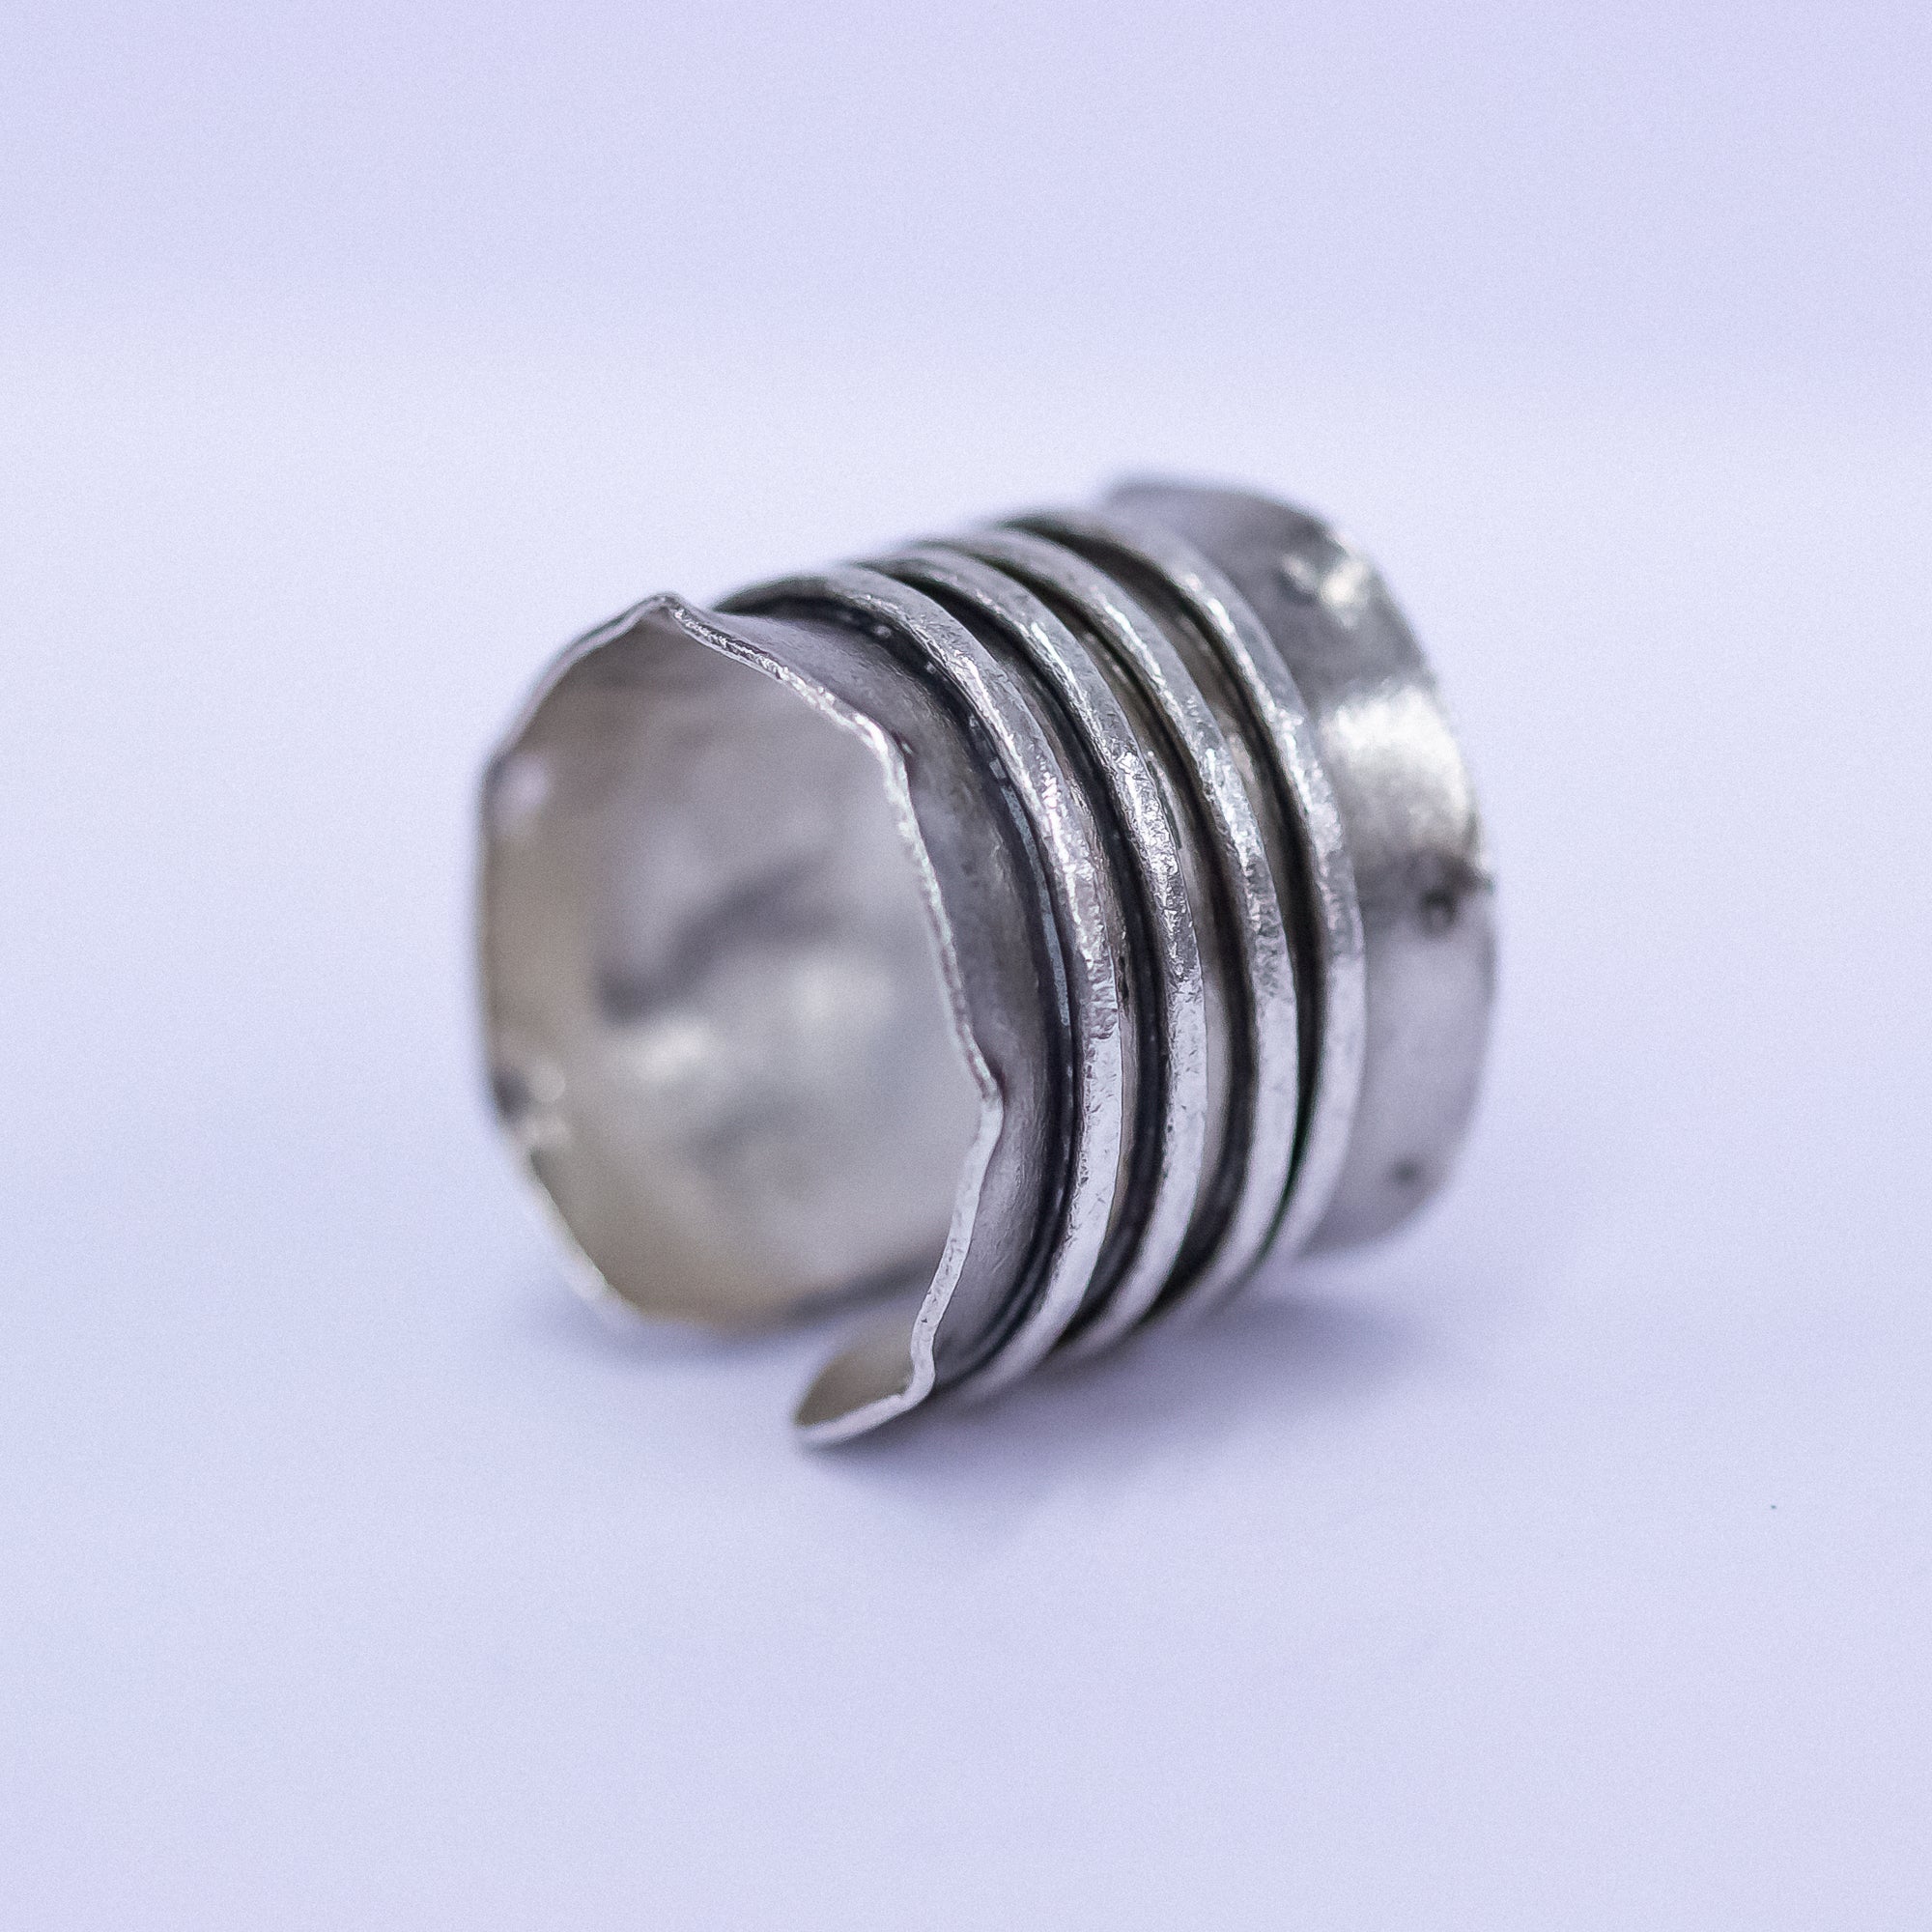 Handmade Soldered Silver Striped Band Ring